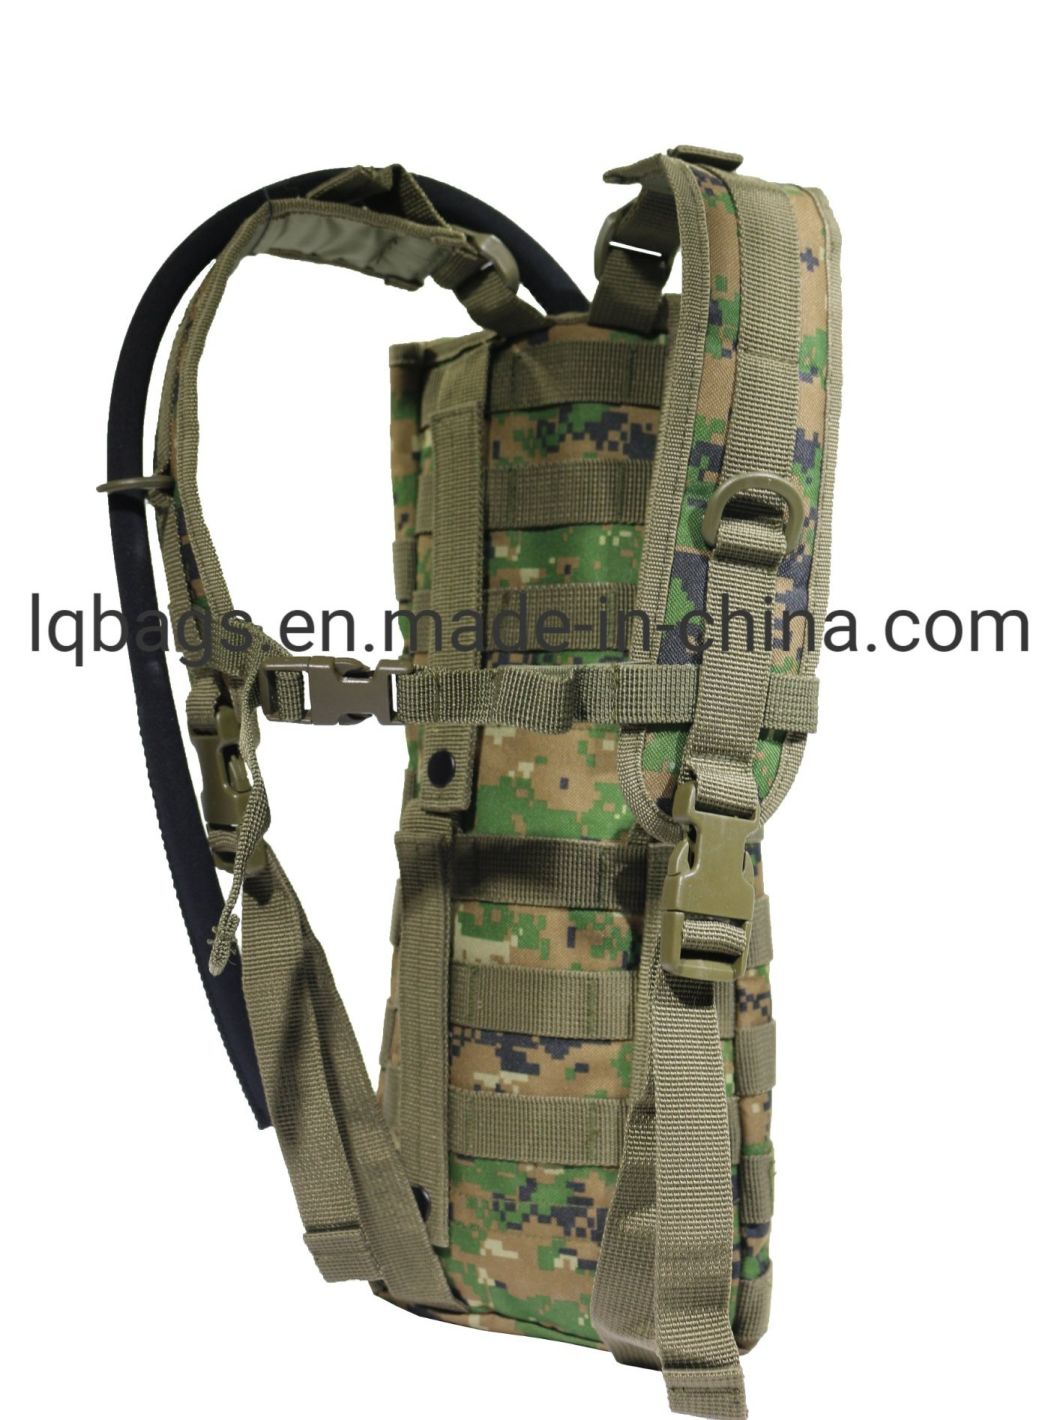 Camouflage Tactical Hydration Backpack Molle Pack with Water Bladder